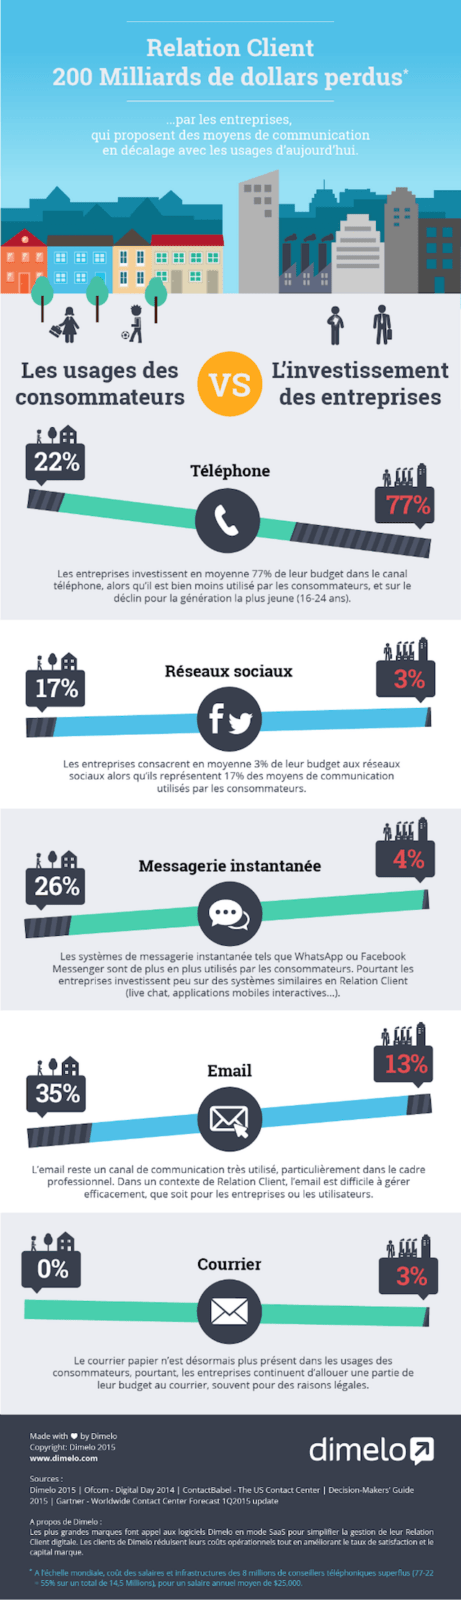 relation-client-infographie-2015